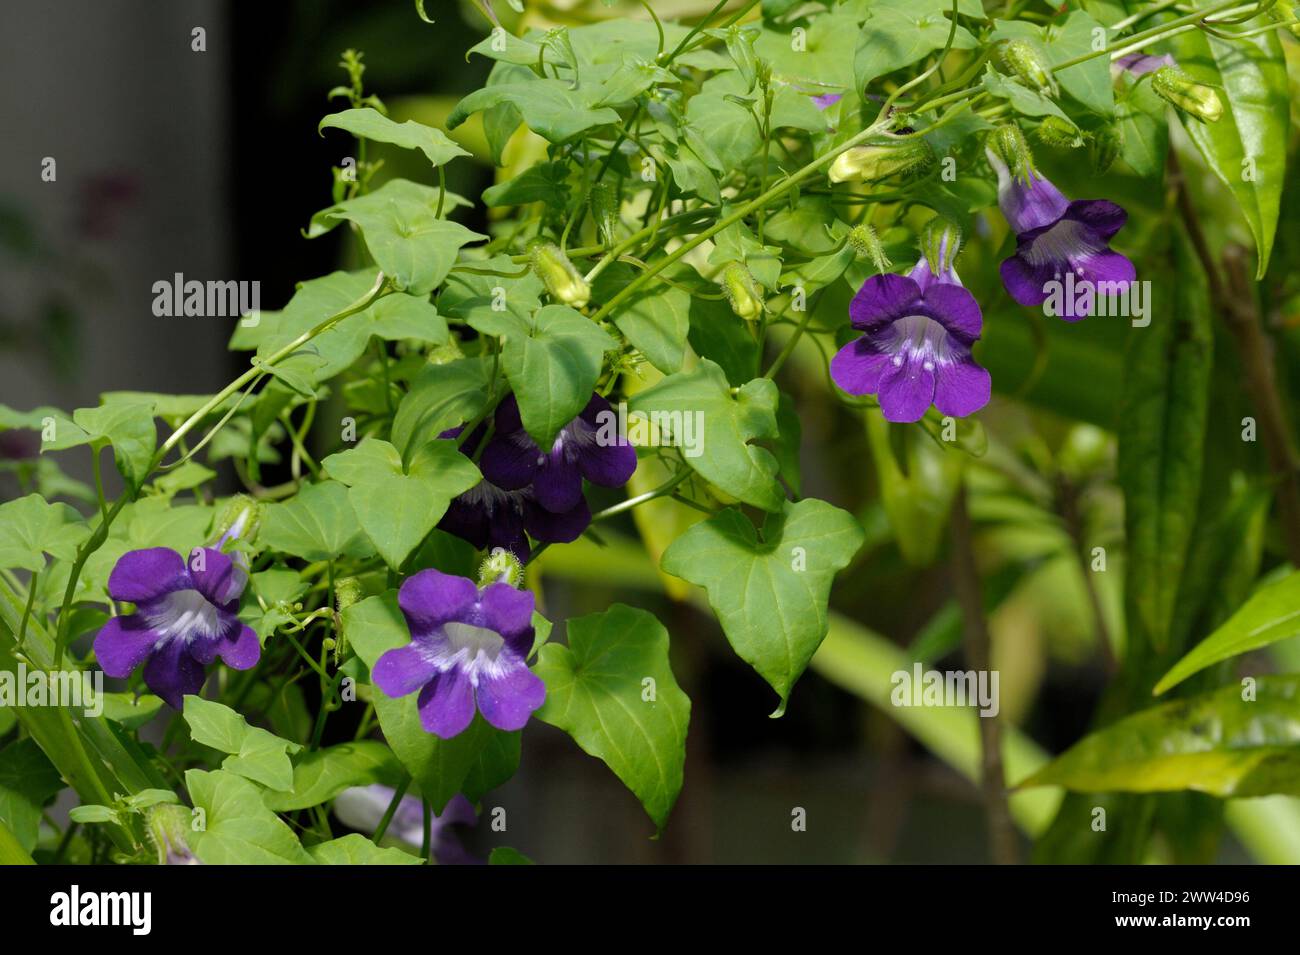 Asarina scandens leaves and flowers Stock Photo